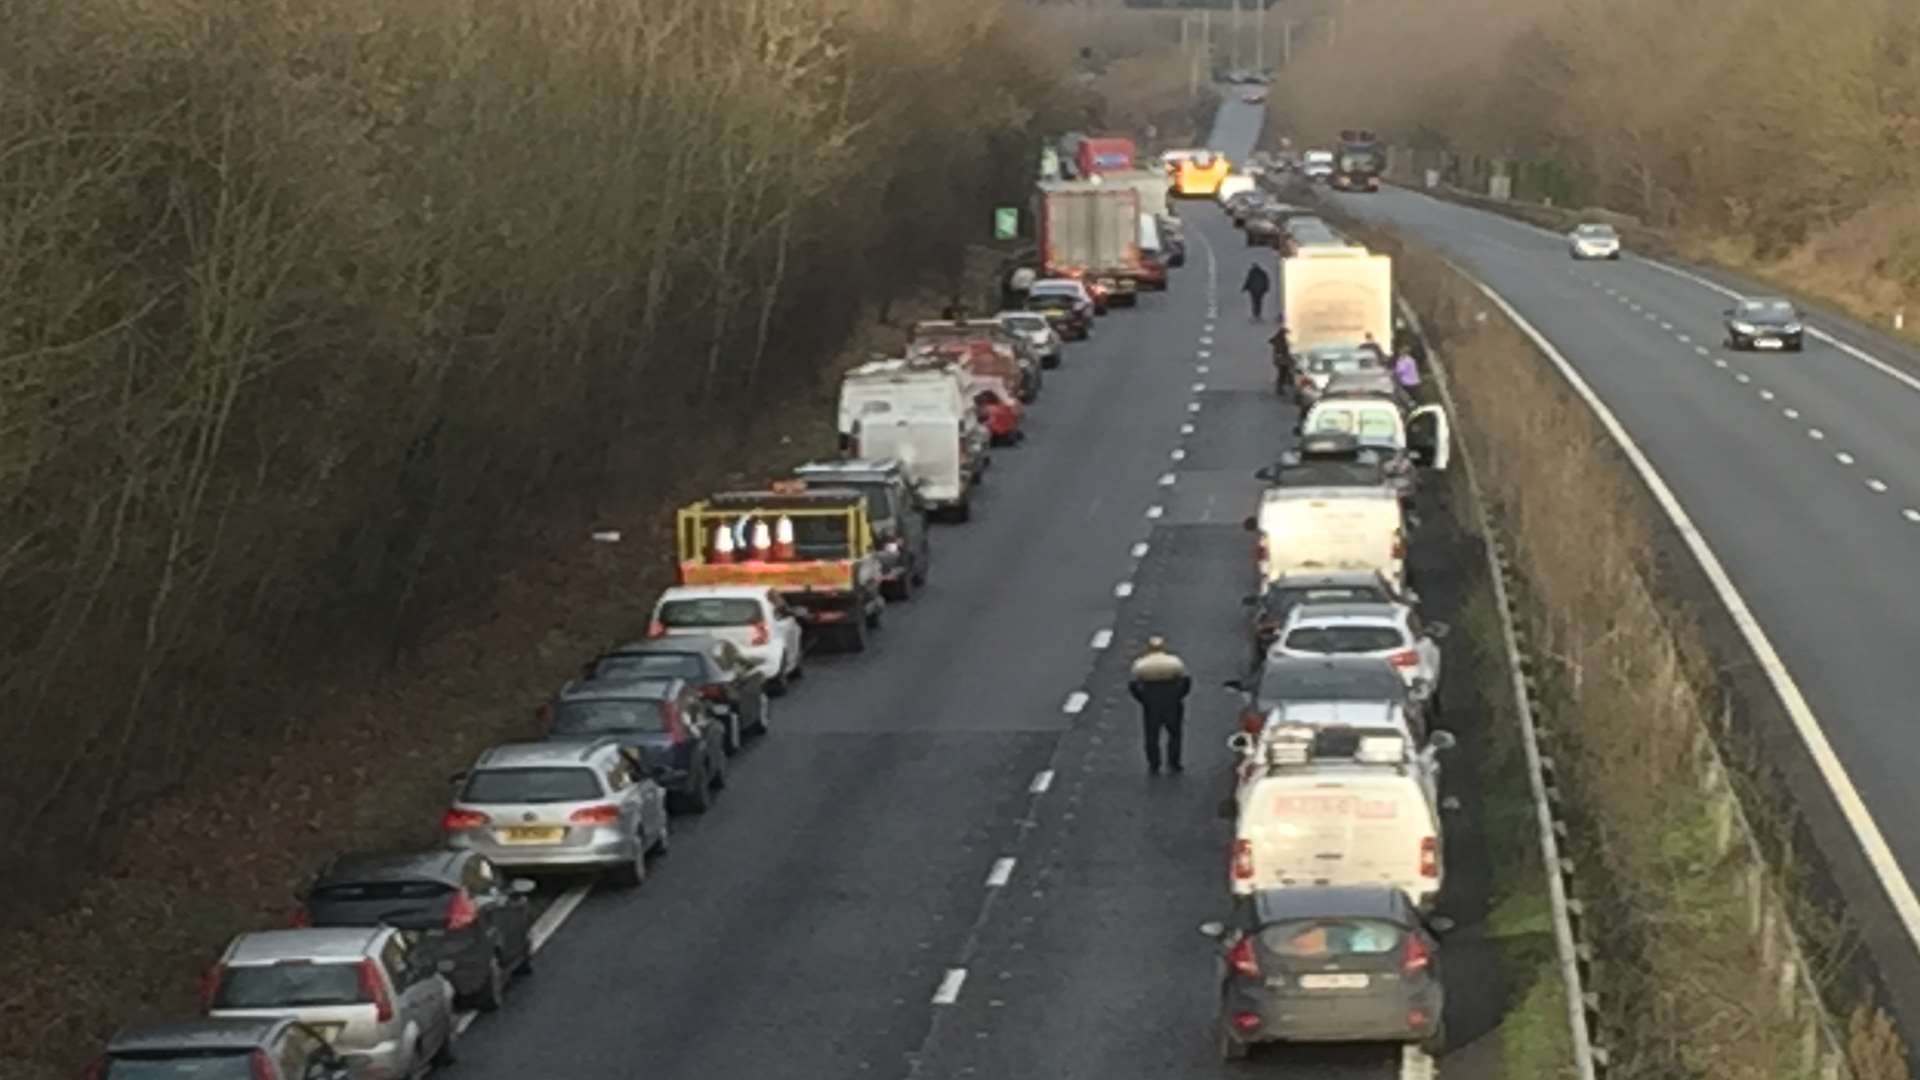 Traffic is building on the A2 after a serious crash.